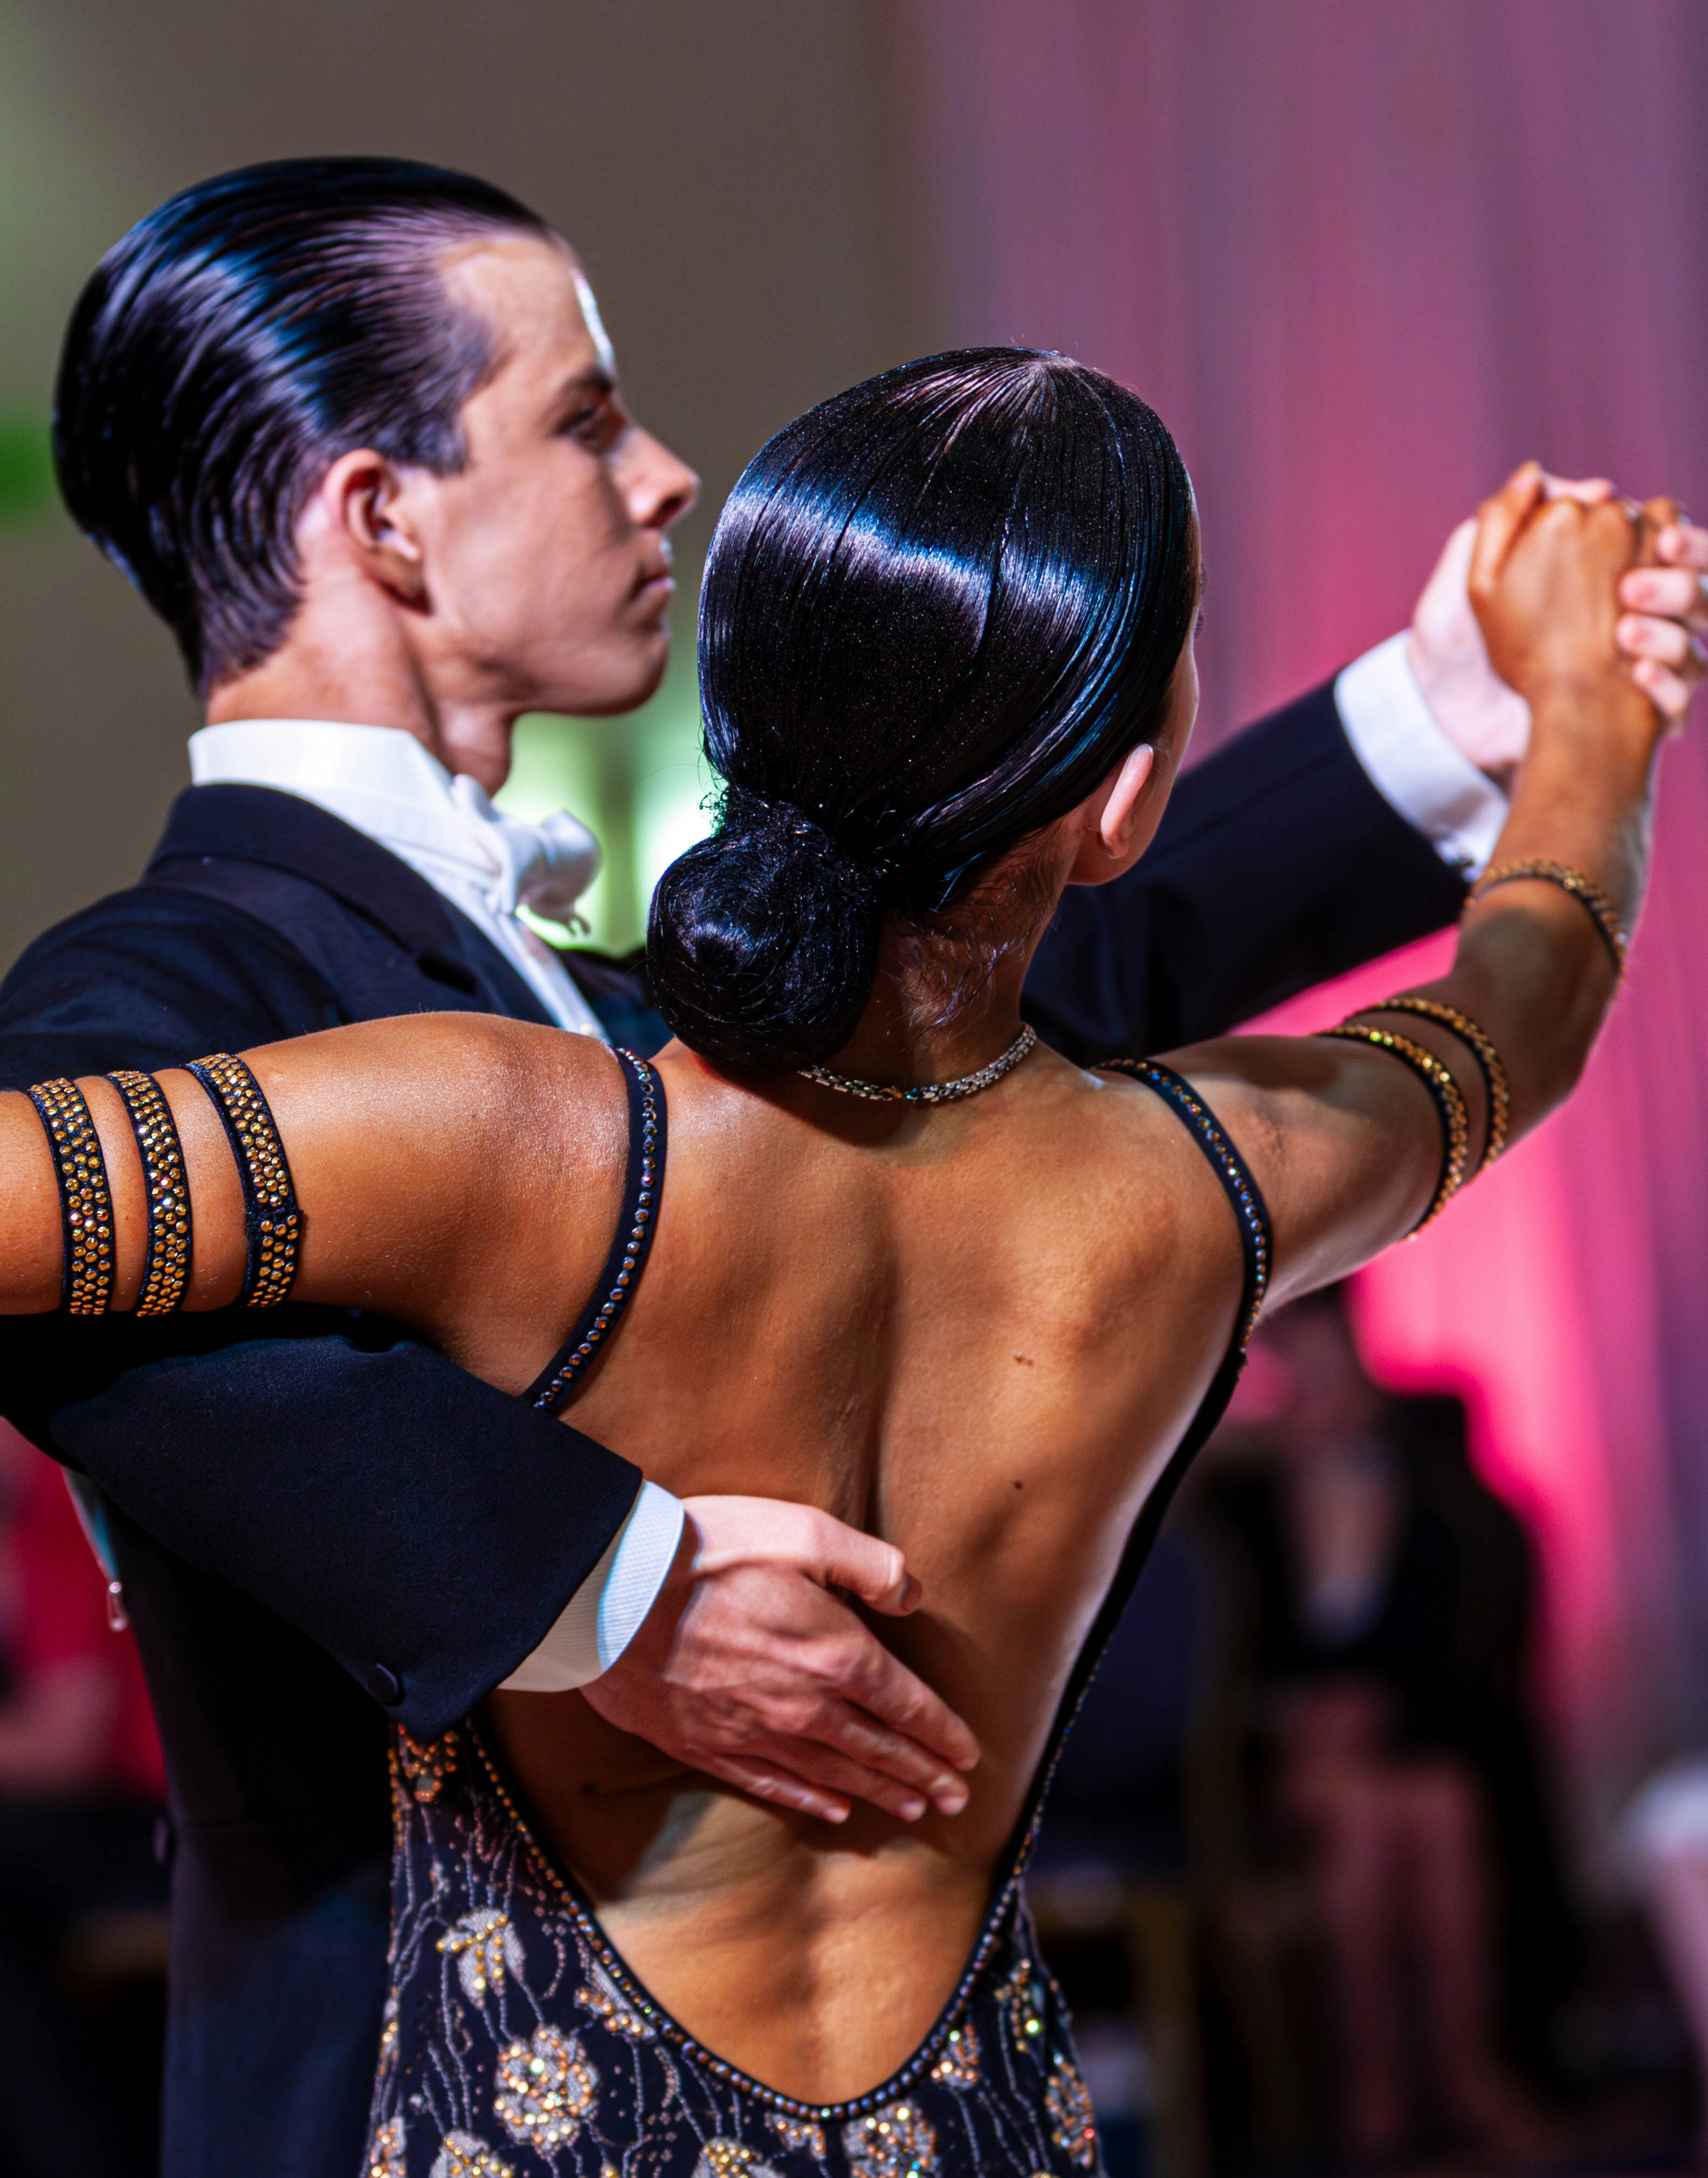 great photo recipe,how to photograph the quickstep -- a light-hearted dance of the standard ballroom dances.